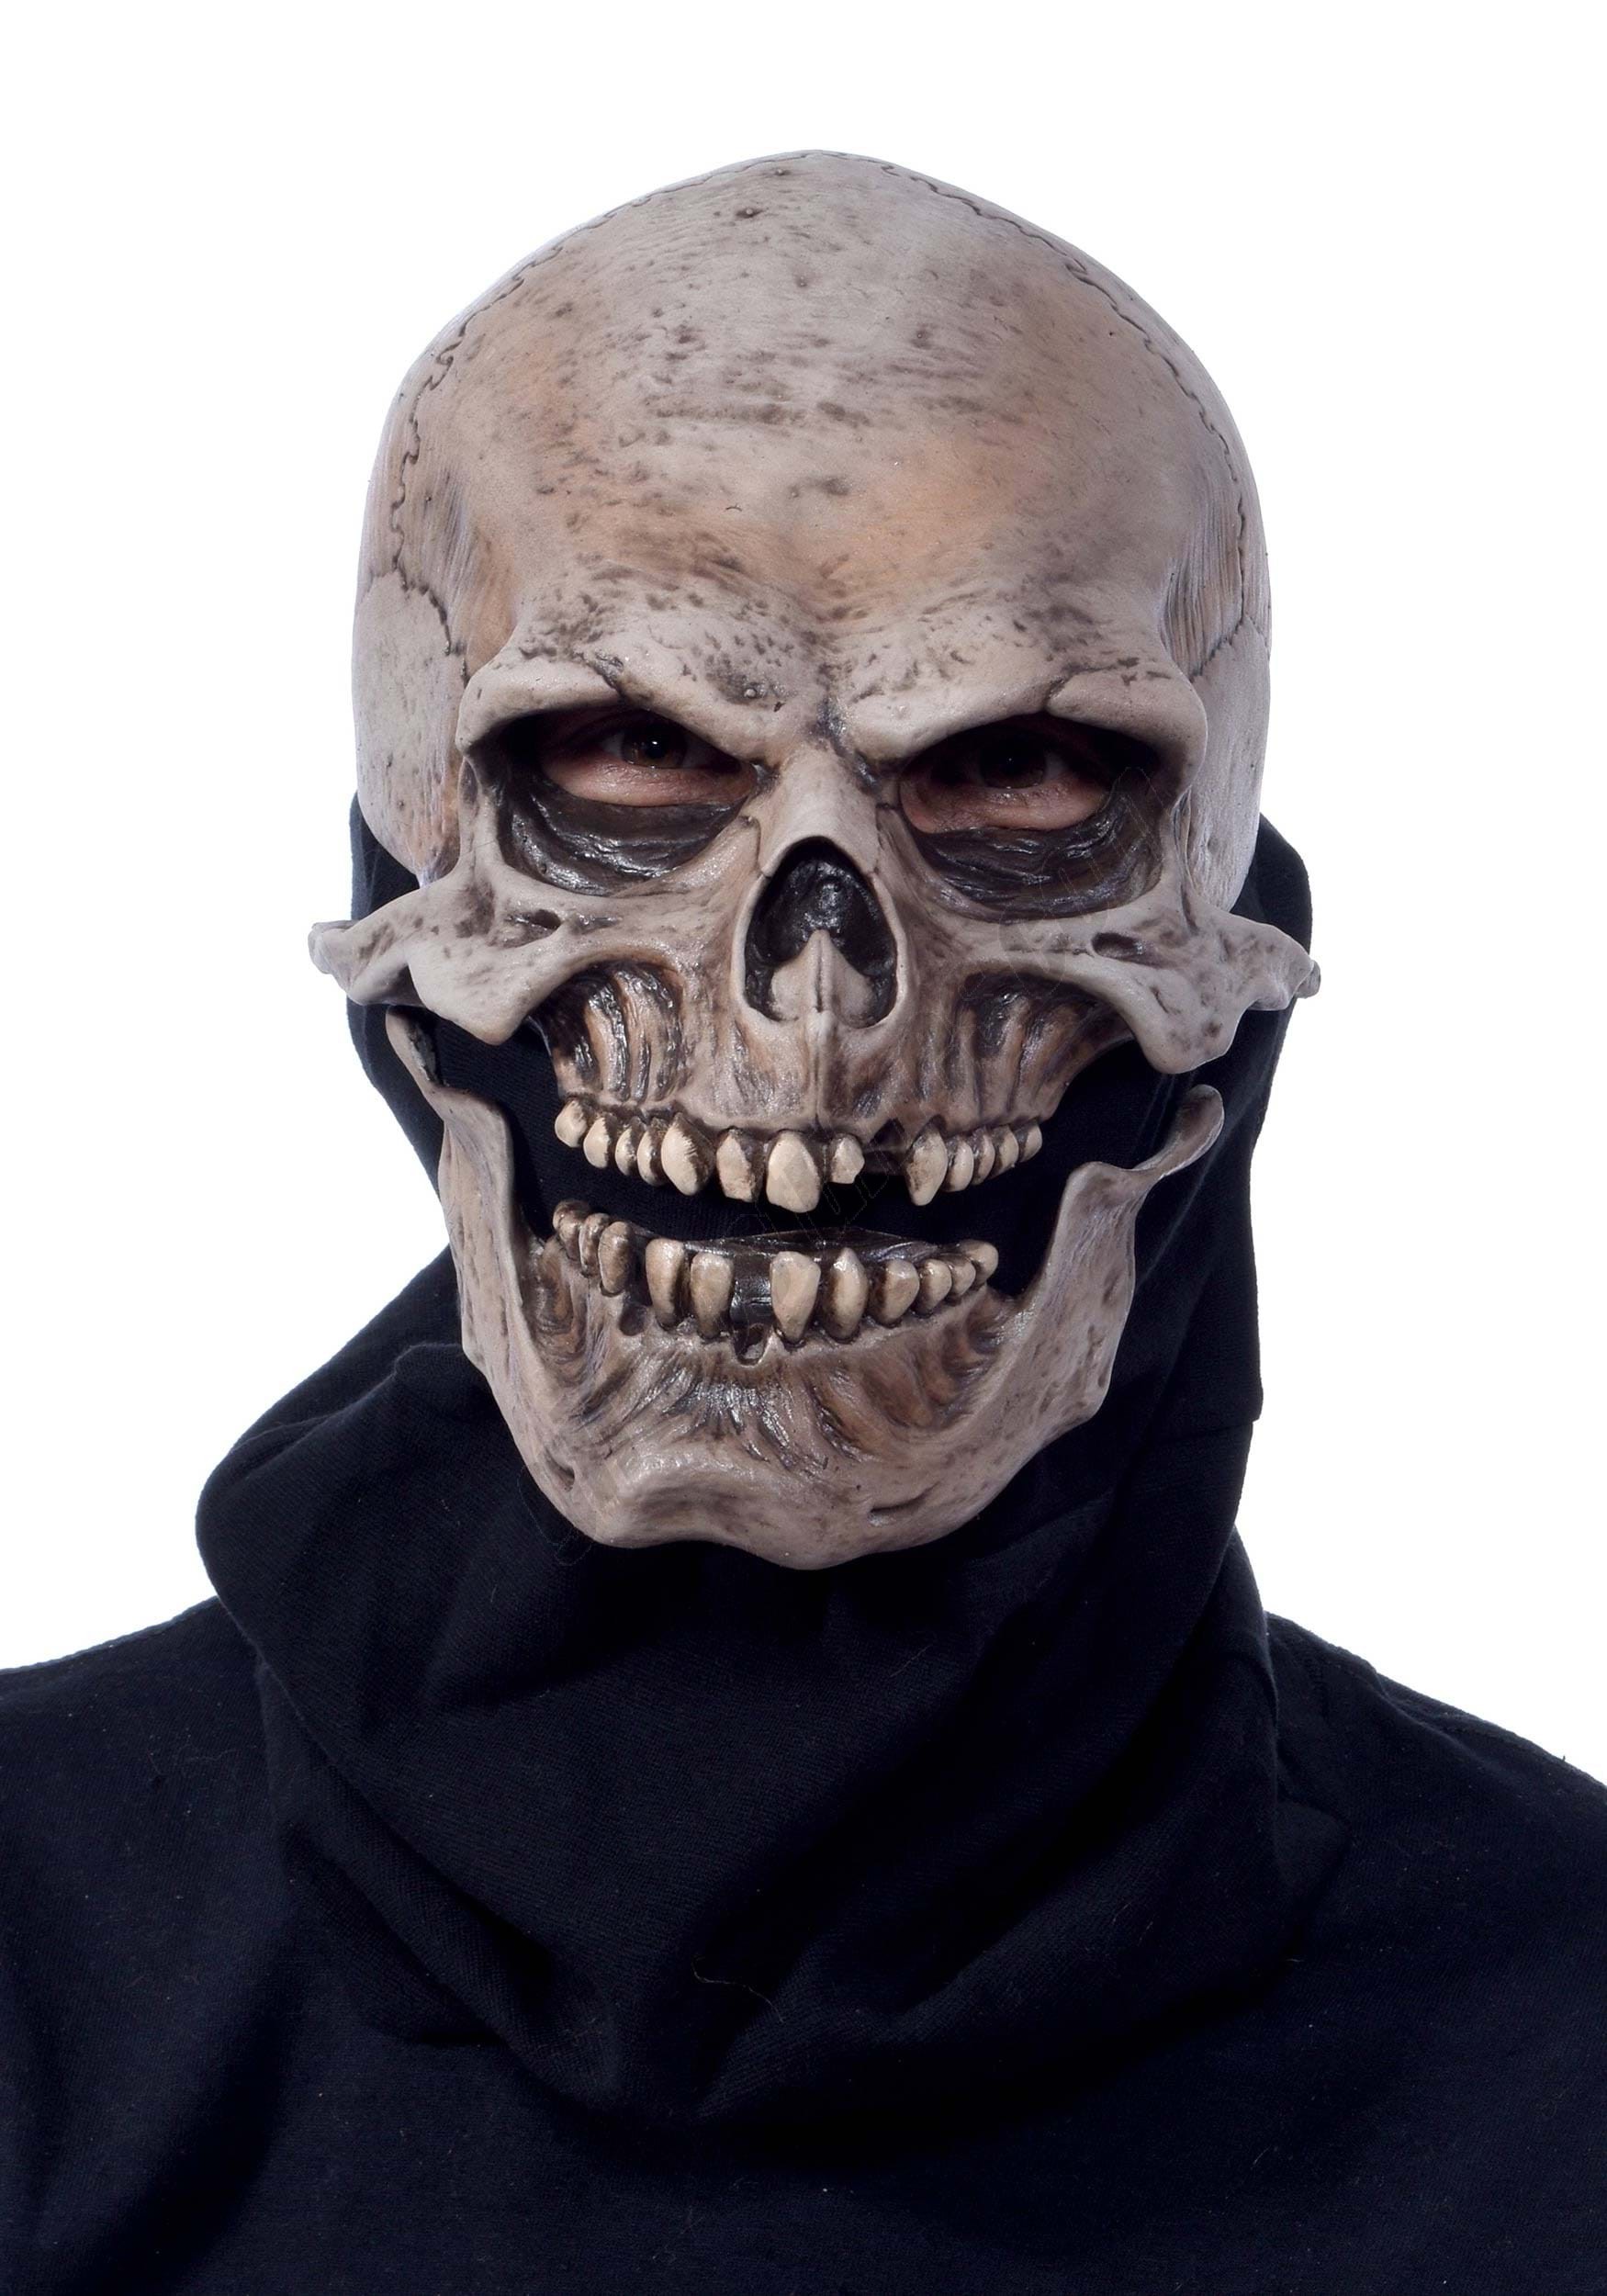 Adult Moving Mouth Skull Mask Promotions - Adult Moving Mouth Skull Mask Promotions